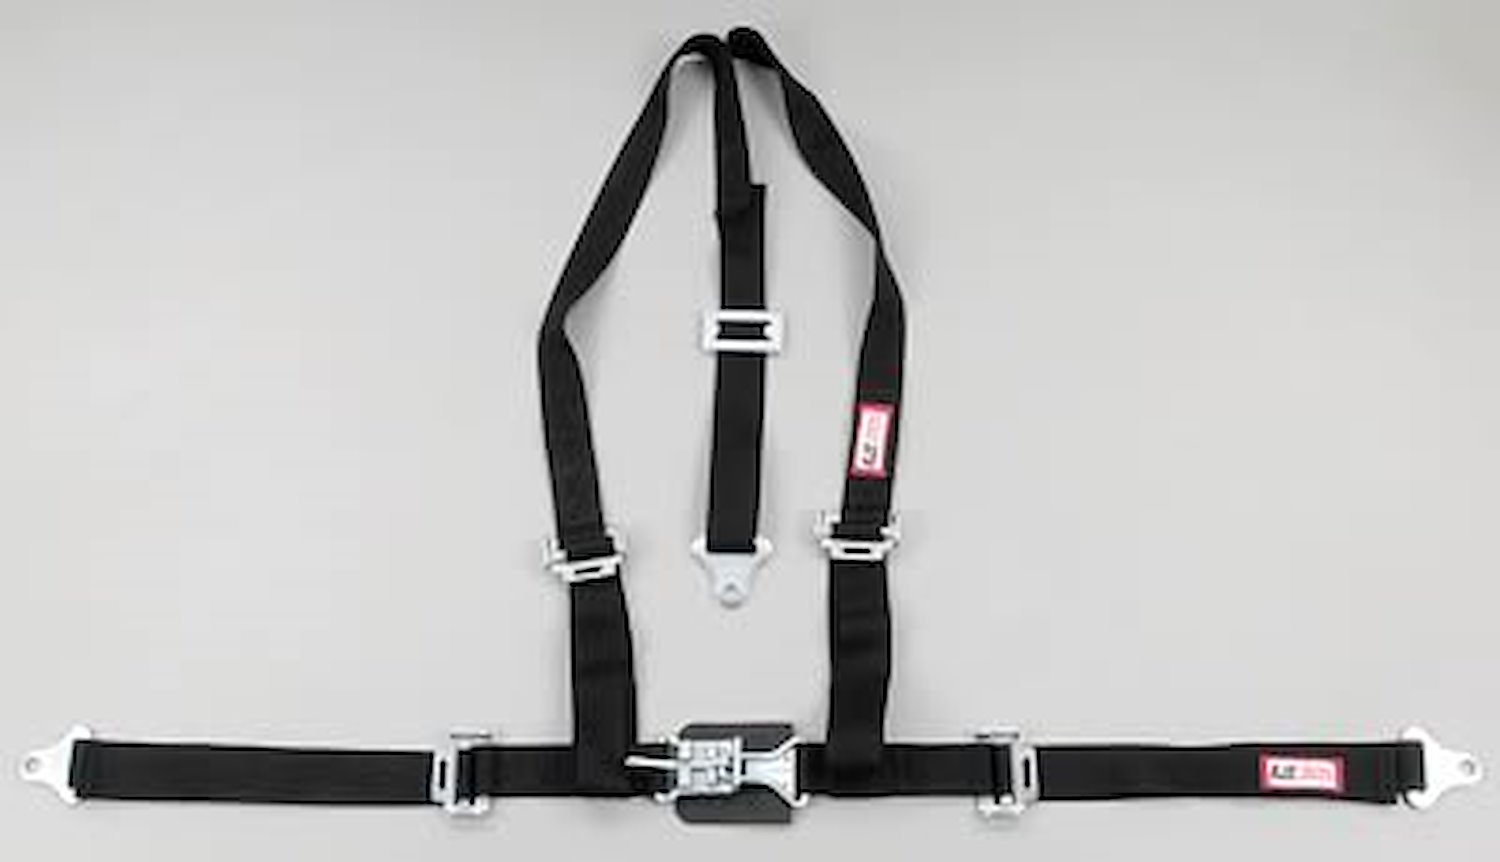 NON-SFI L&L HARNESS 3 PULL DOWN Lap Belt w/adjuster 2 S.H. Individual FLOOR Mount ALL WRAP ENDS PURPLE